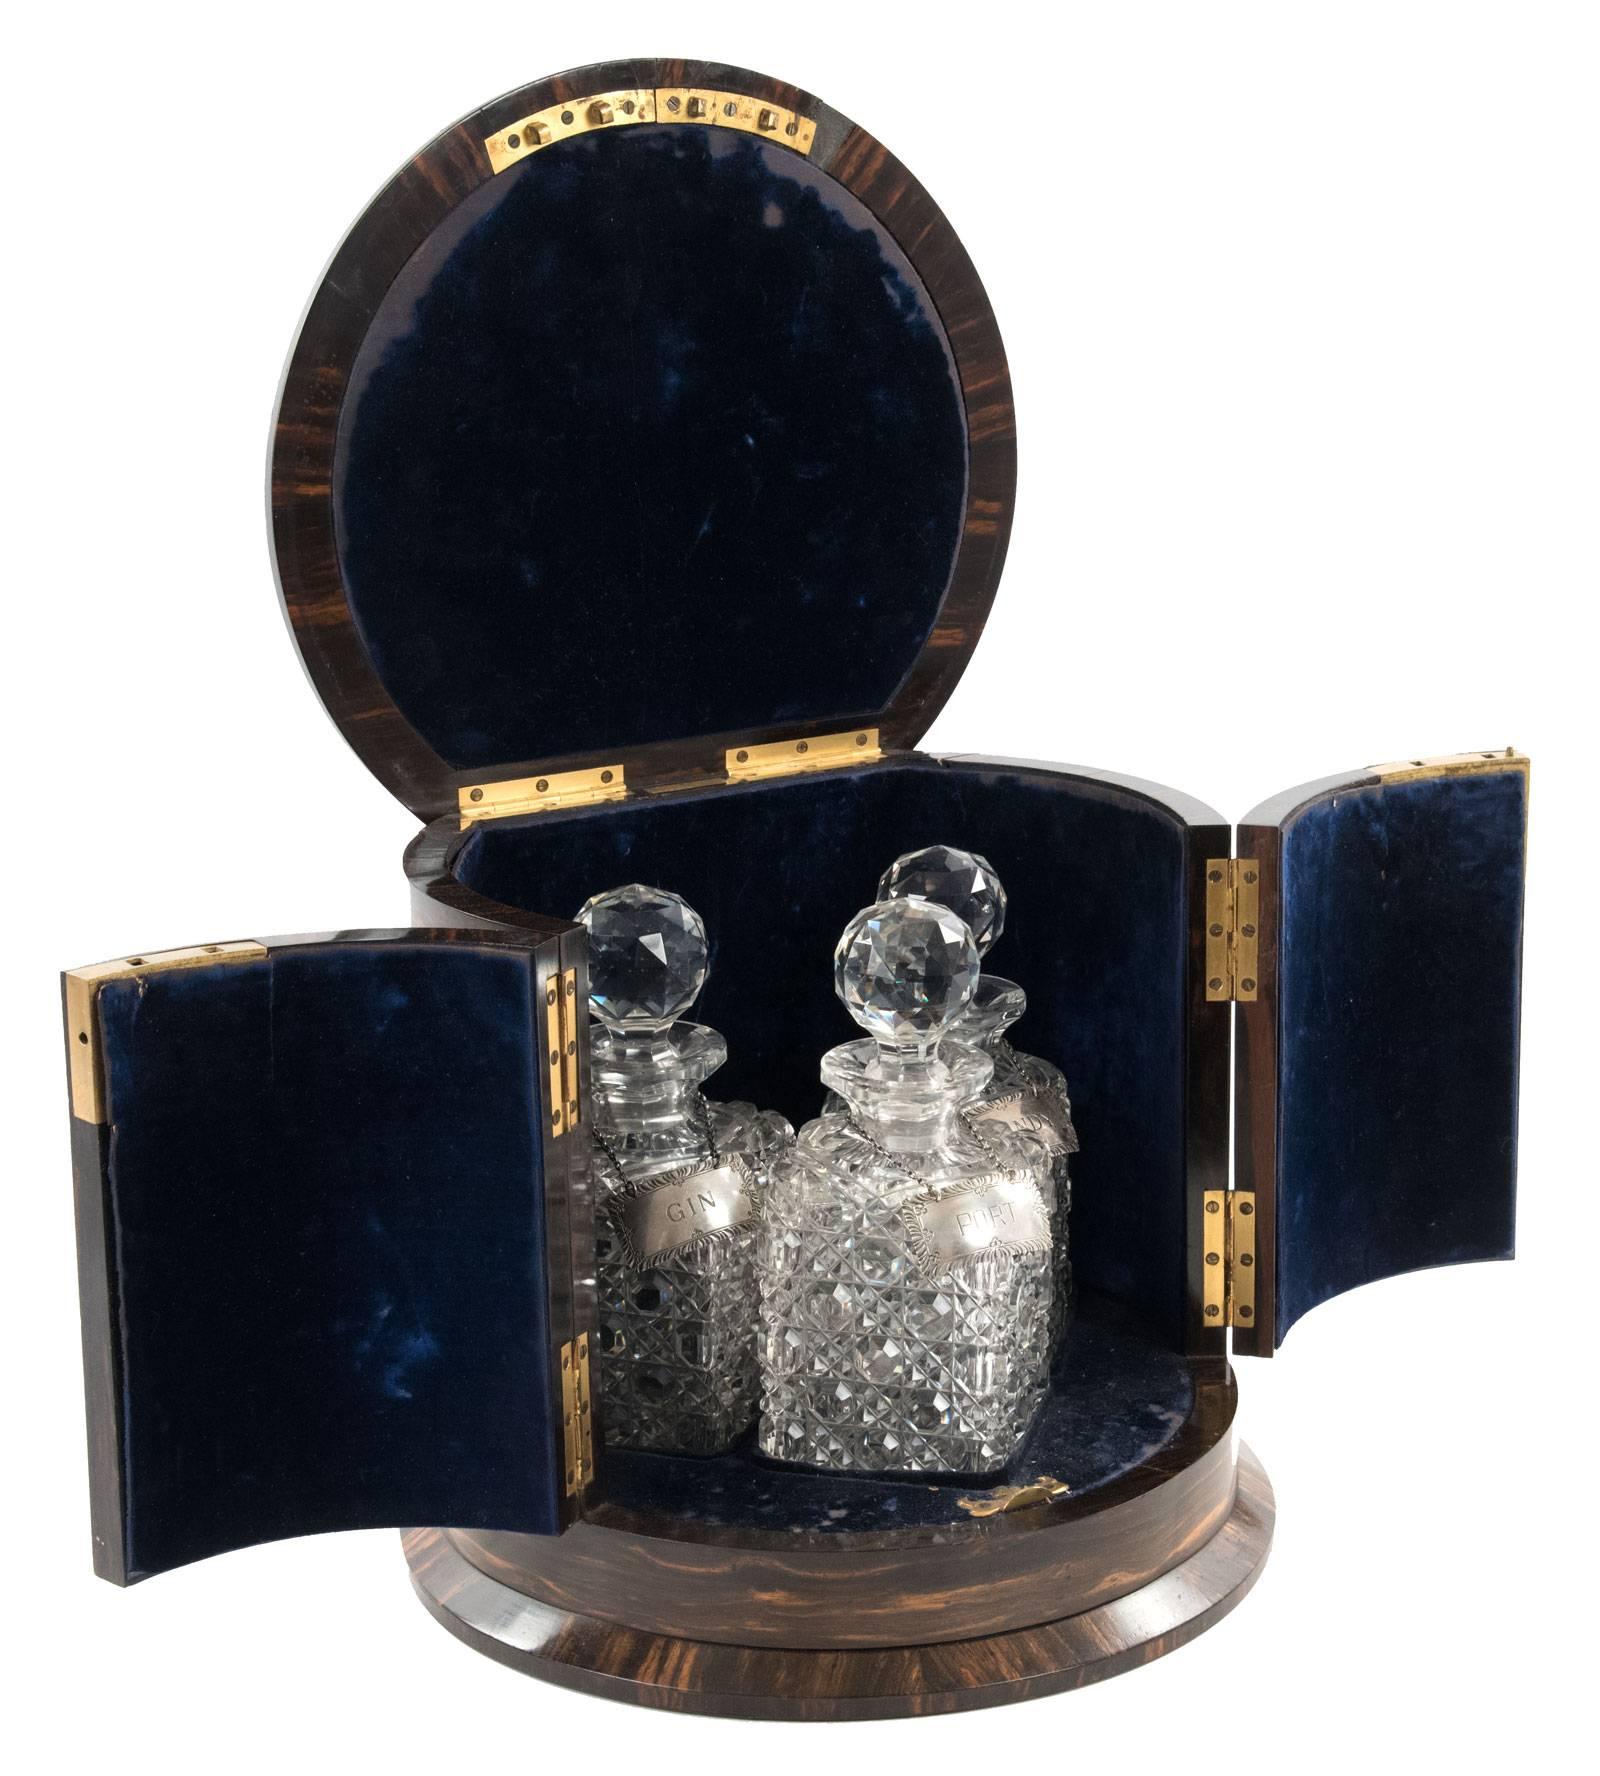 A mid-19th century coromandel bar with hinged lid and locking two-door cabinet front that opens to reveal an interior lined with blue felt, which houses a three-piece crystal decanter set sitting within fitted mouldings, with an engraved plaque